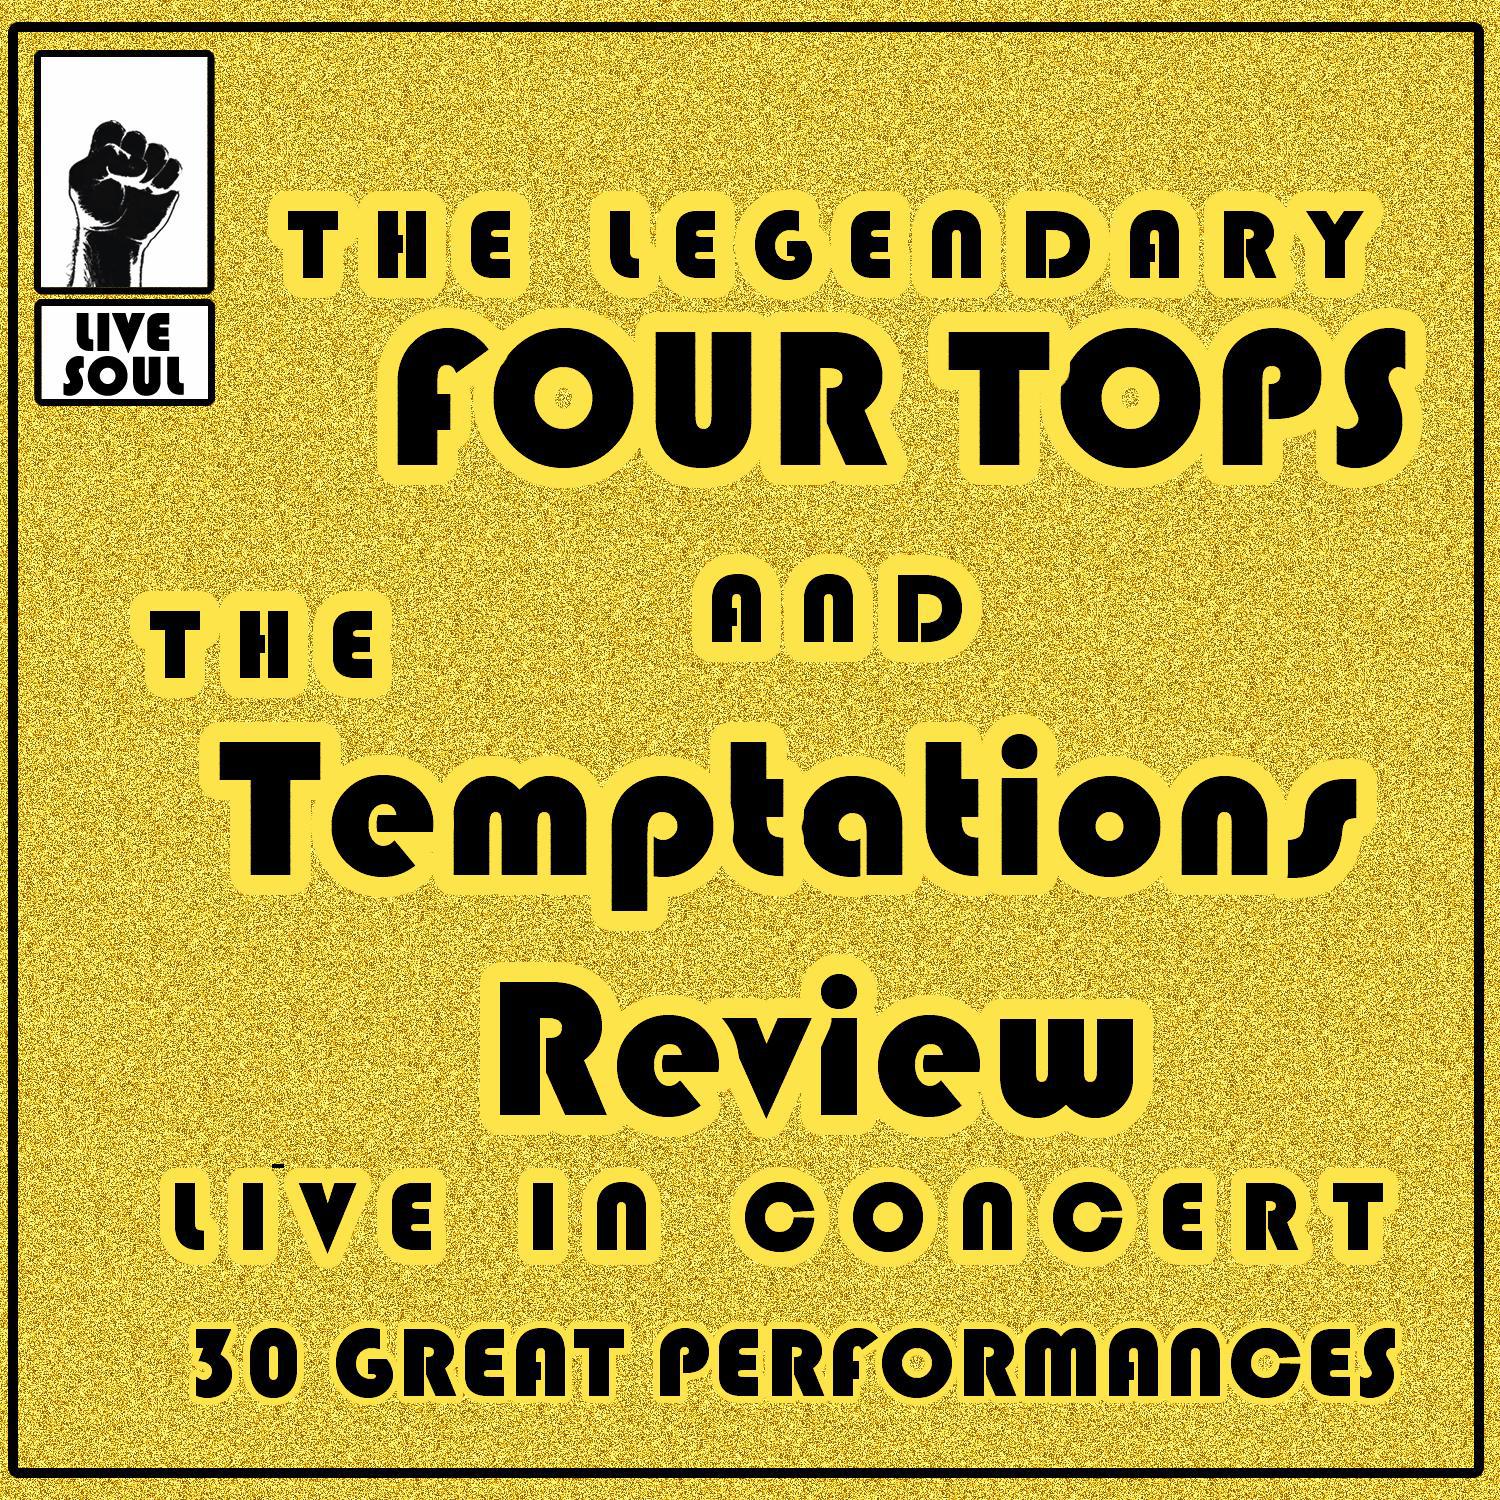 The Legendary Four Tops and The Temptations Review: Live in Concert 30 Great Performances专辑